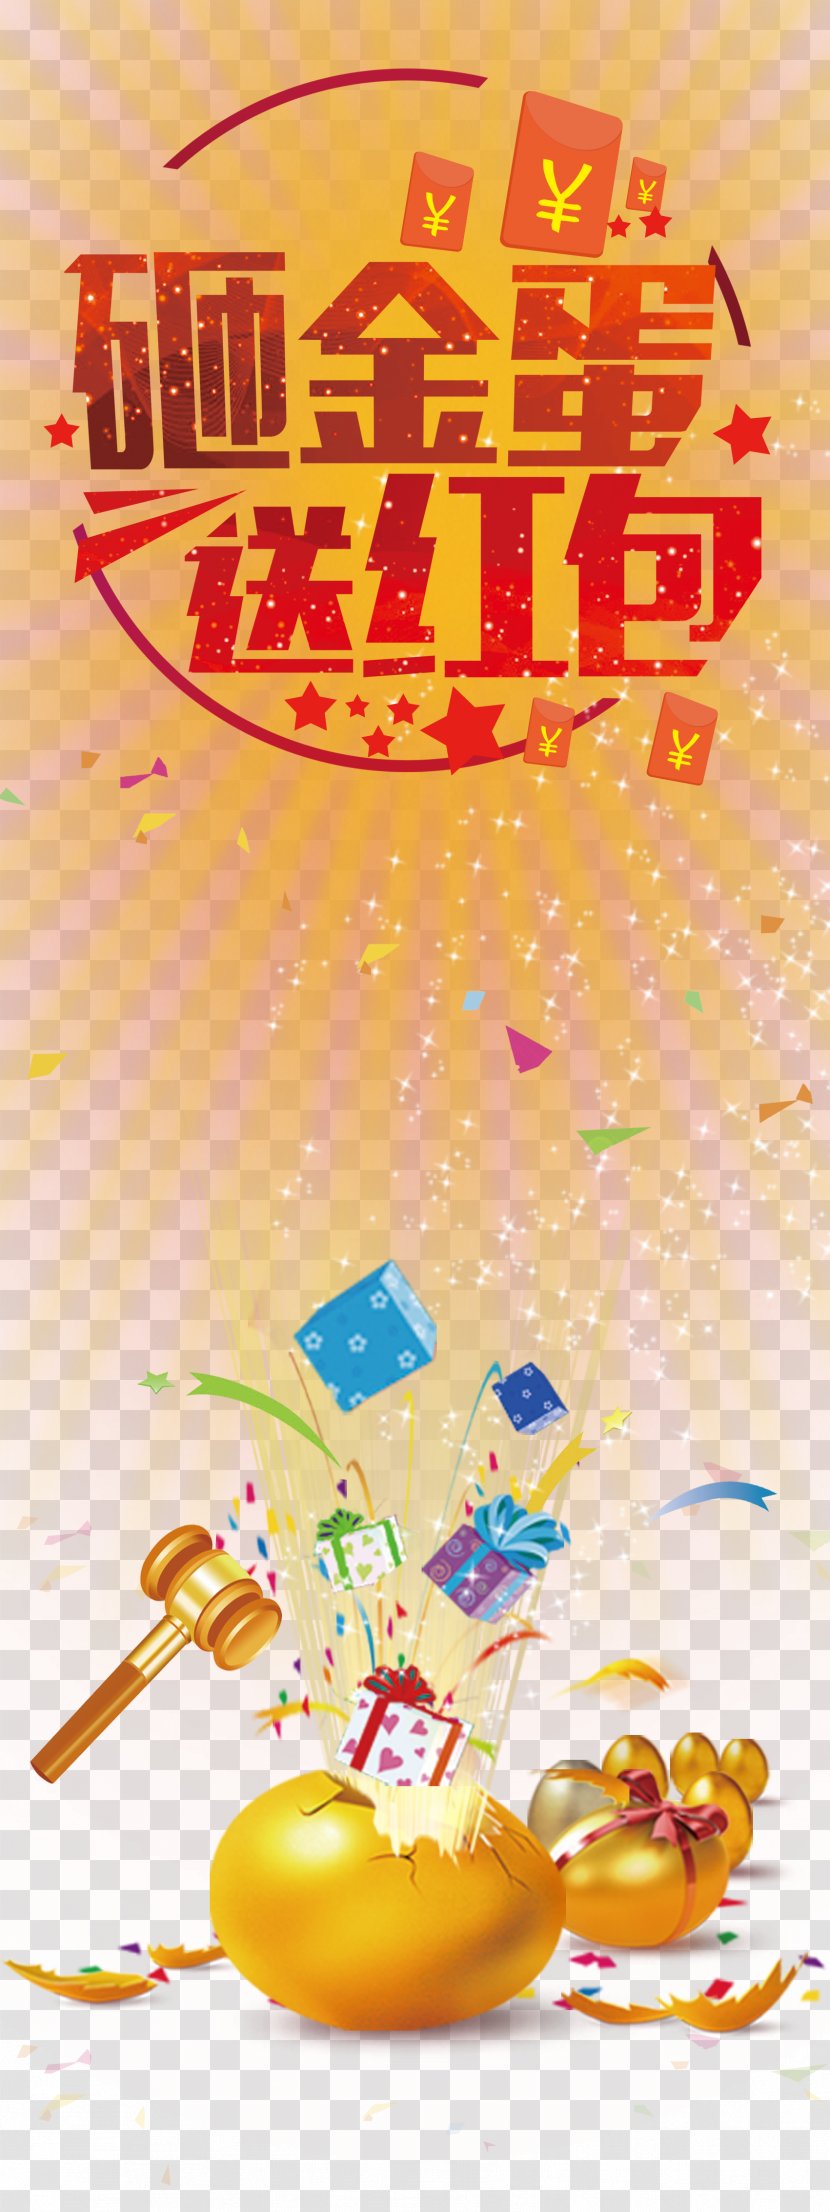 Red Envelope Wallpaper - Hit The Golden Eggs To Win Prizes Transparent PNG